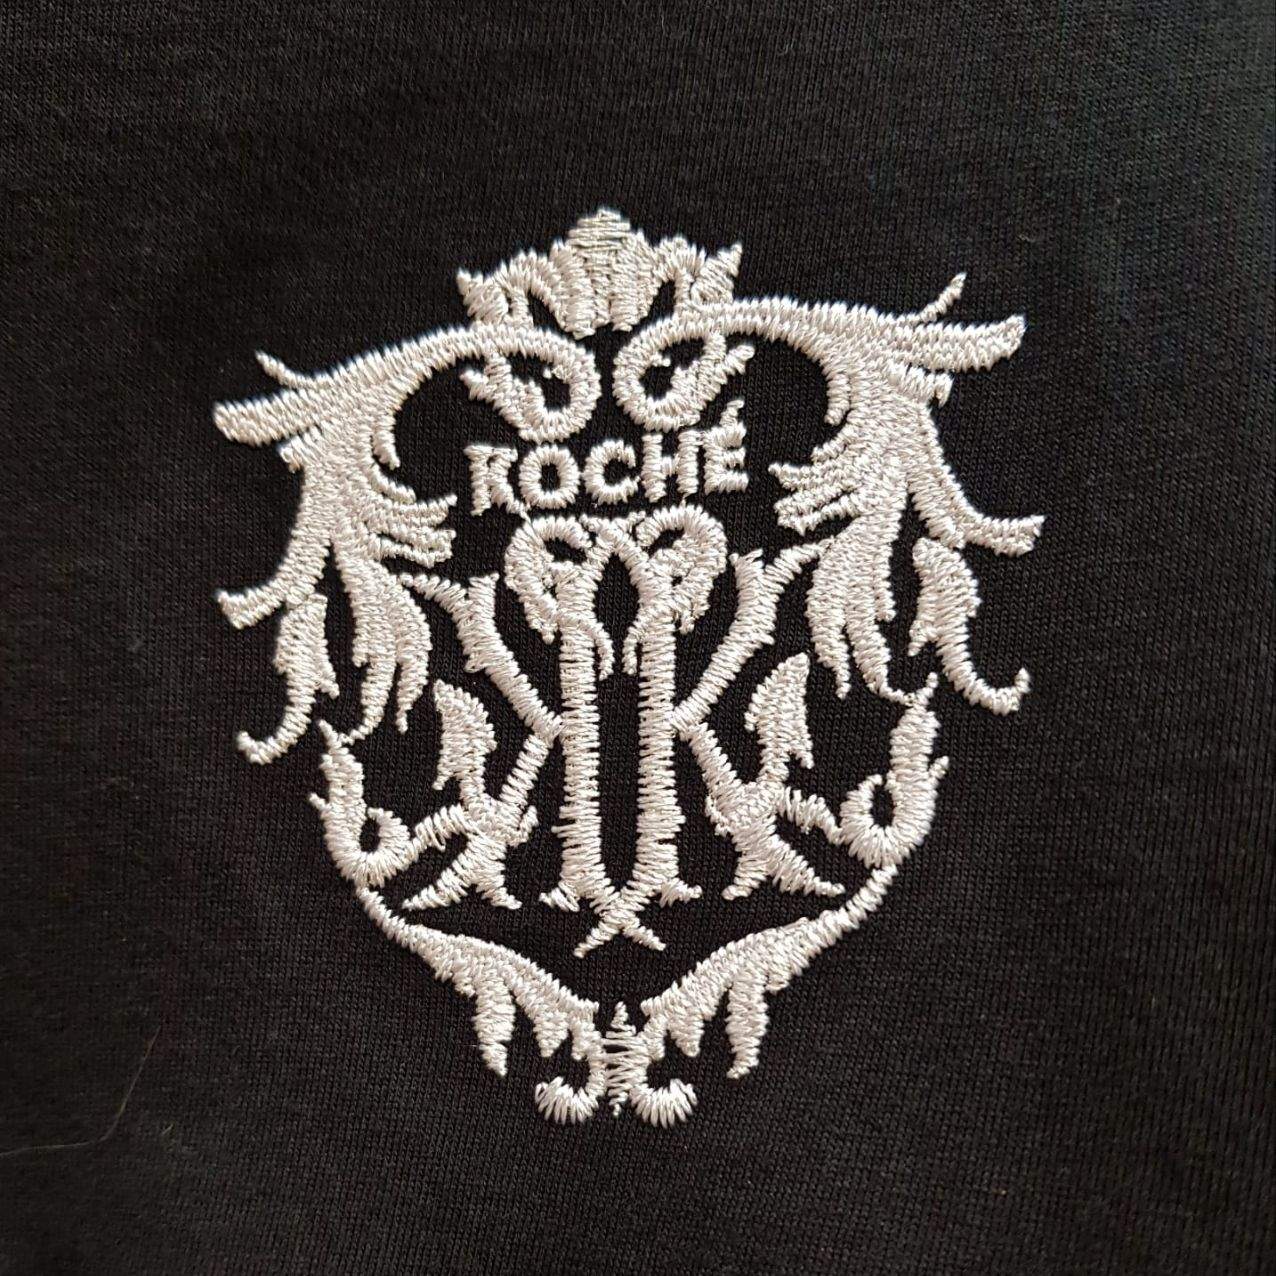 Koché - Top Jersey with open sleeves with logo embroidery